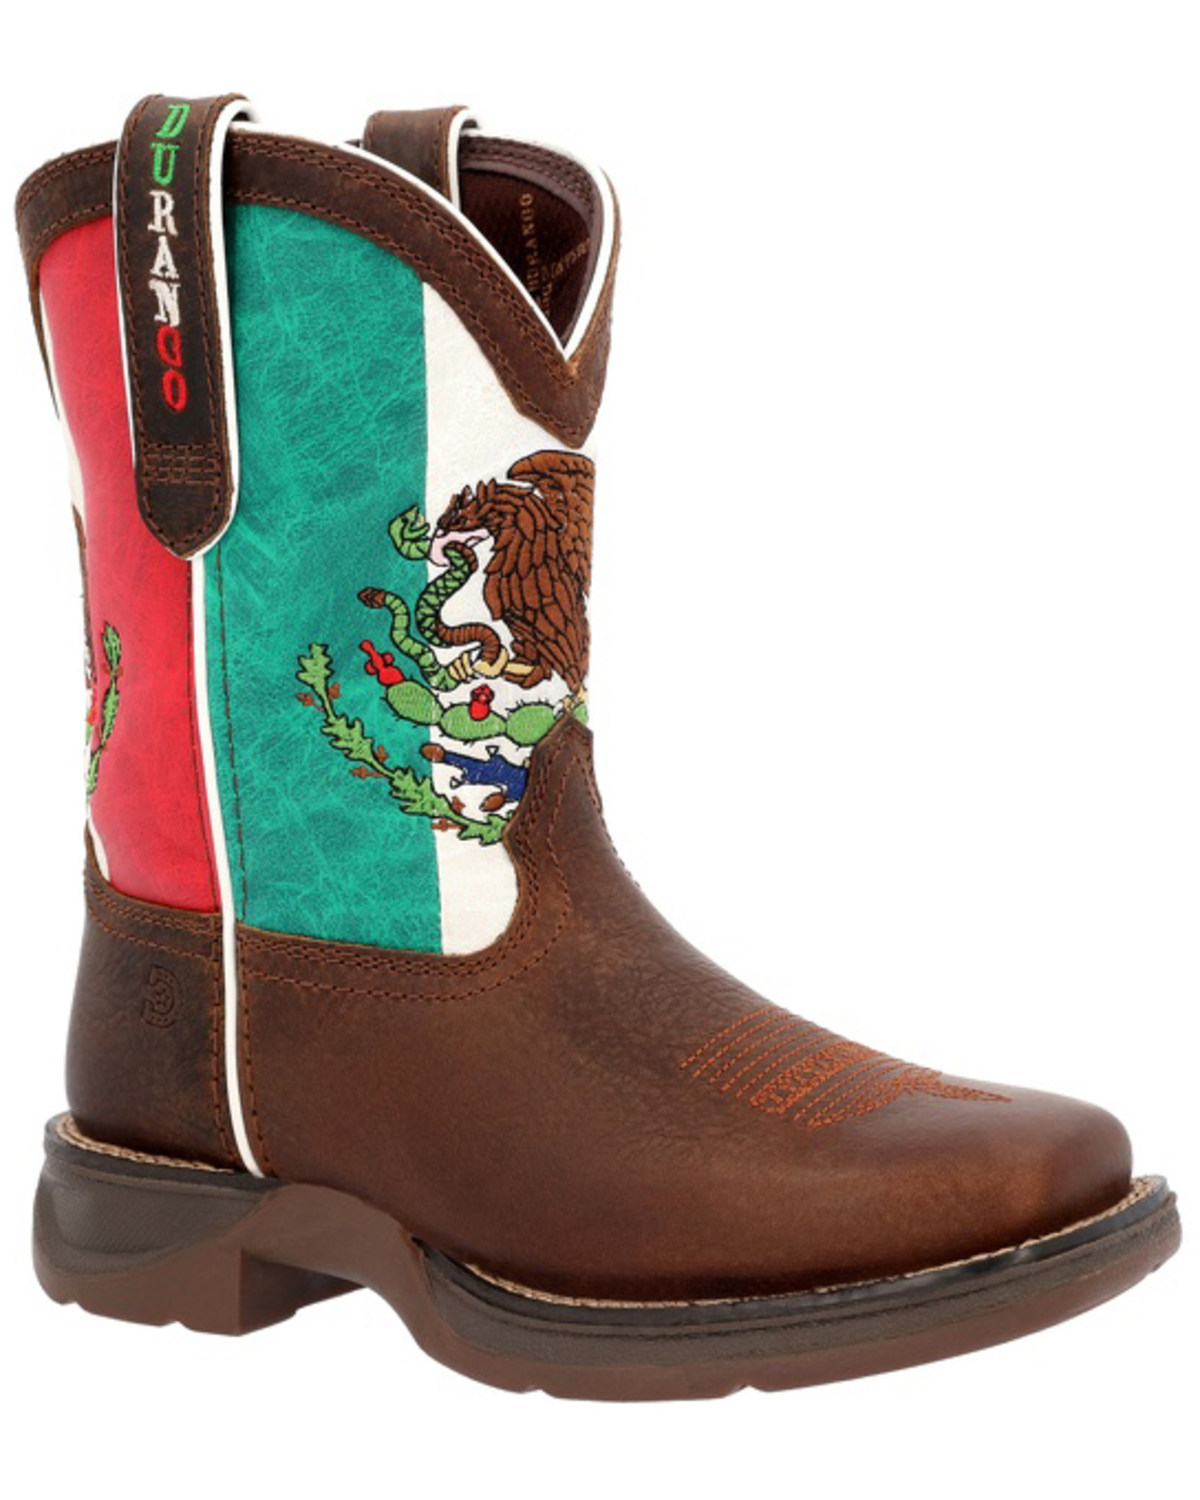 Durango Boys' Lil' Rebel Mexican Flag Western Boots - Broad Square Toe